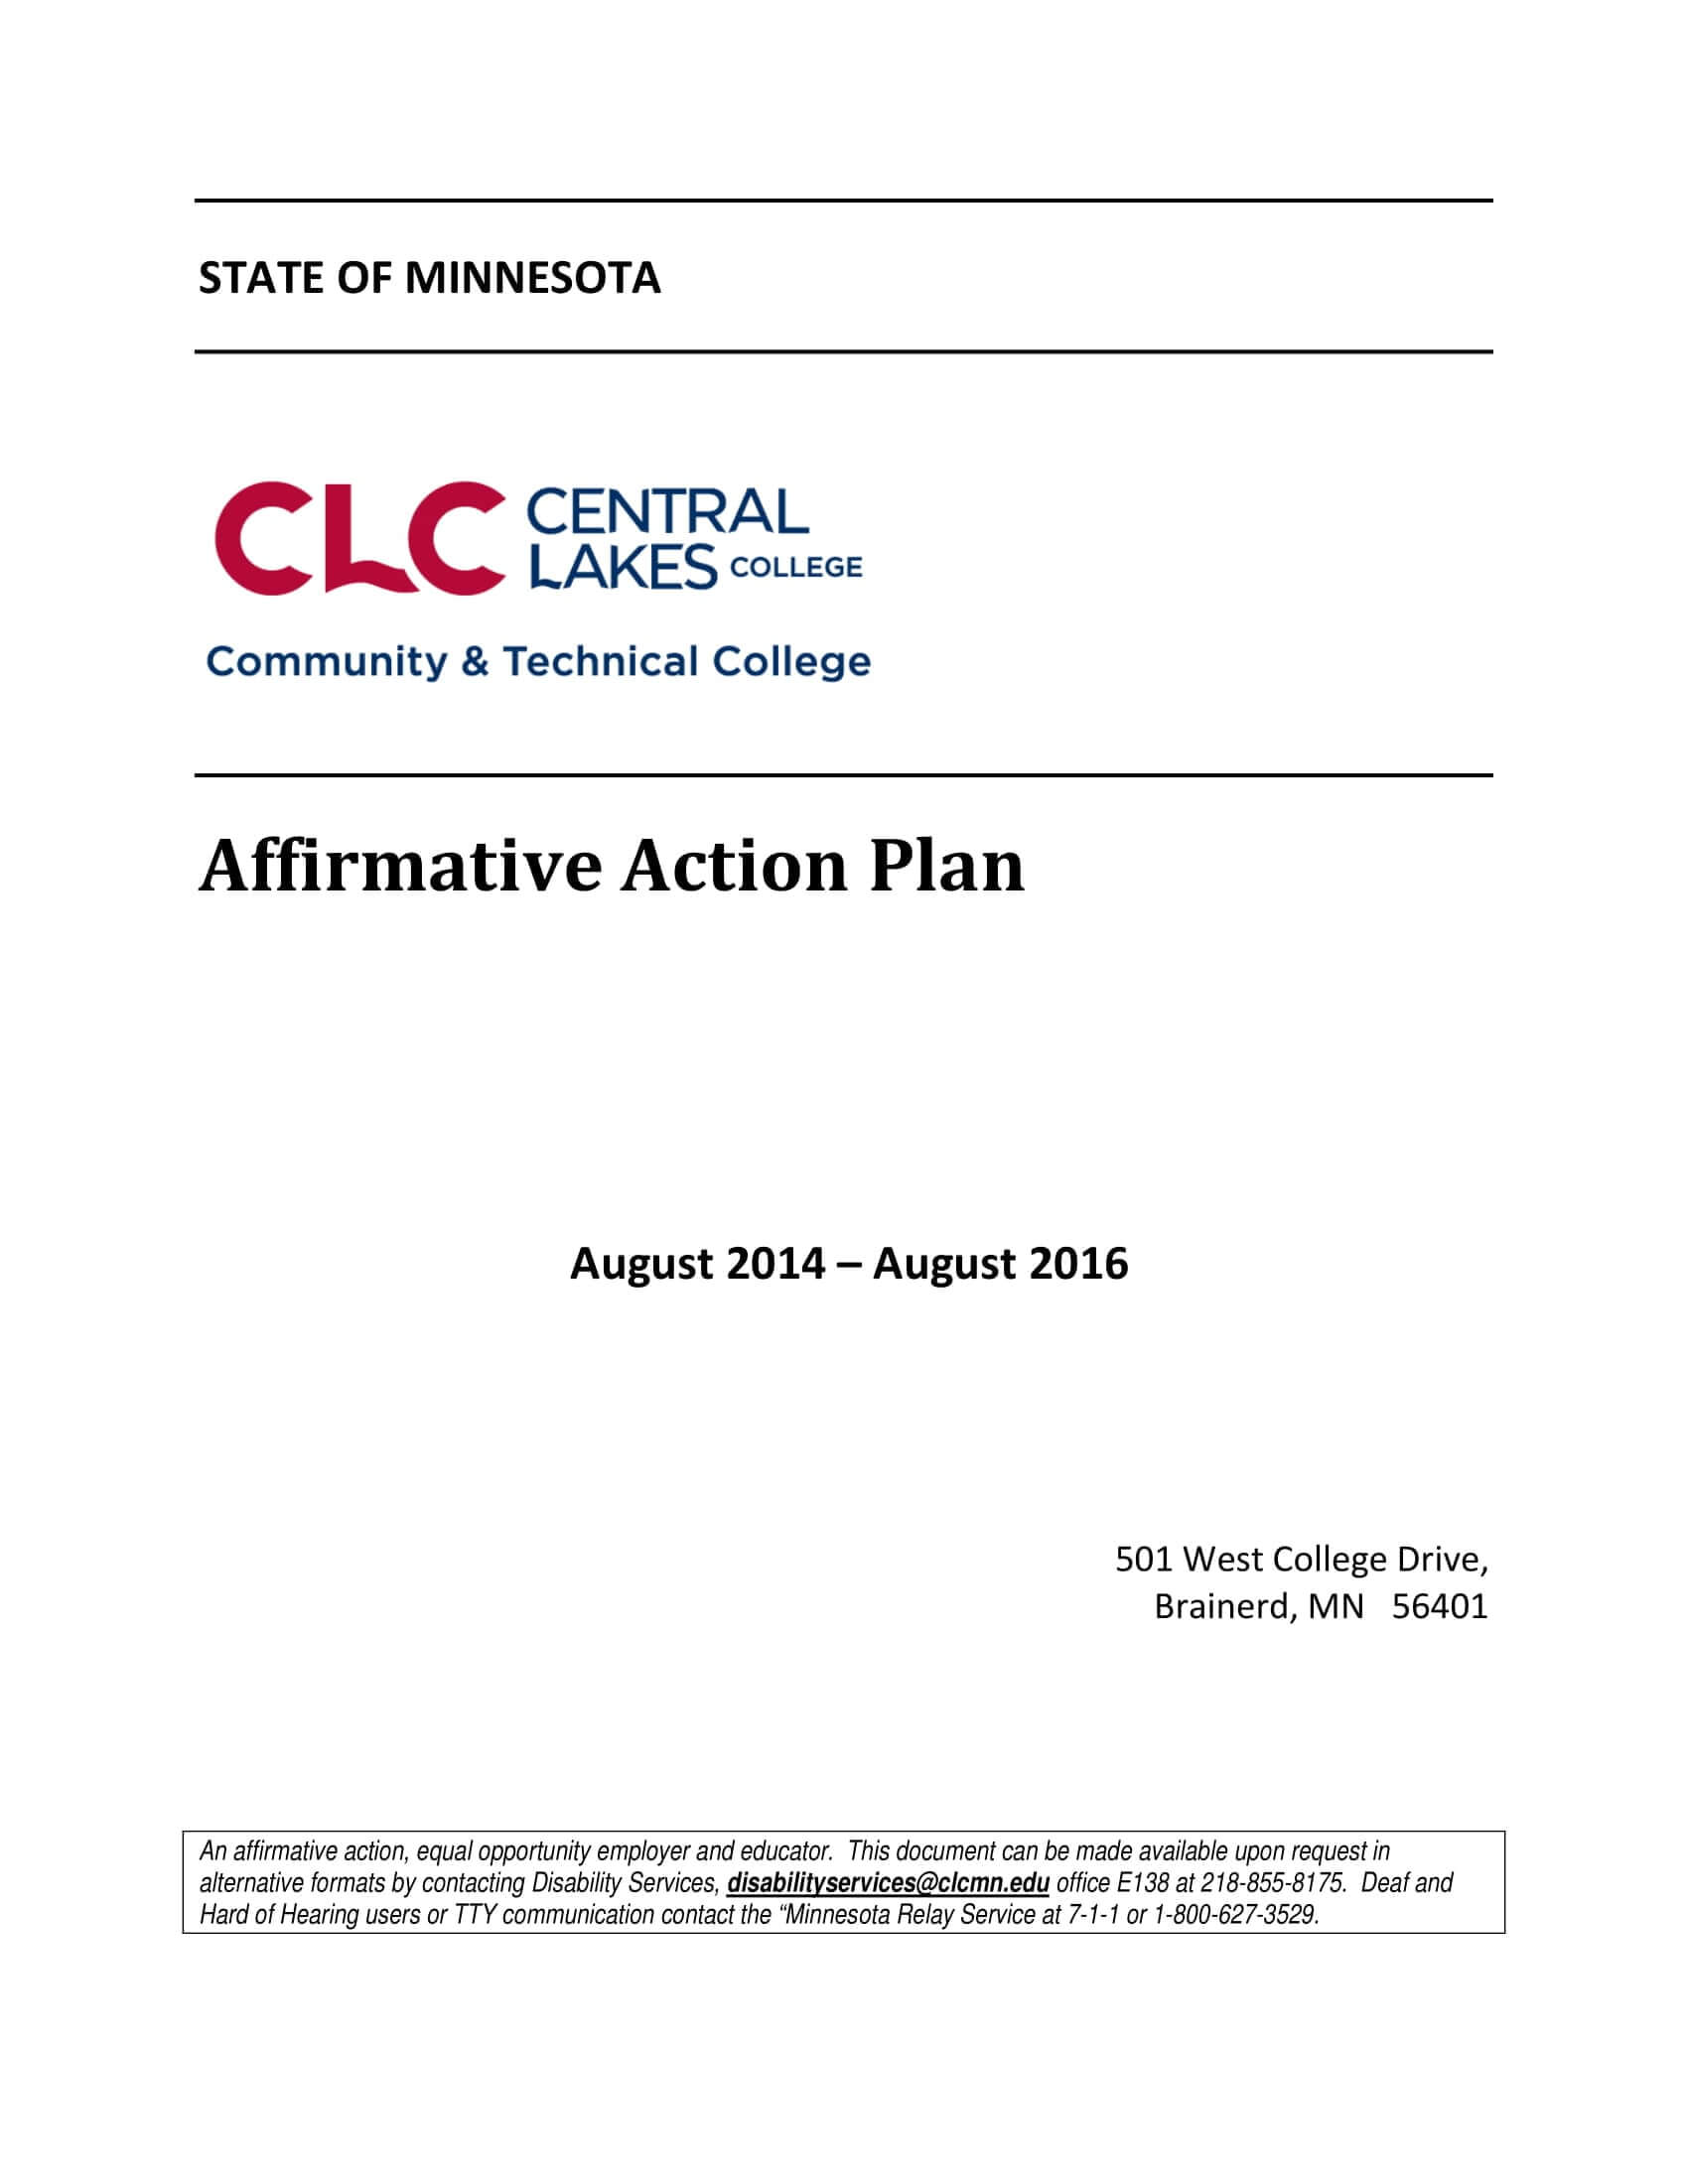 17+ Affirmative Action Plan Examples – Pdf, Word | Examples In Affirmative Action Plan Template